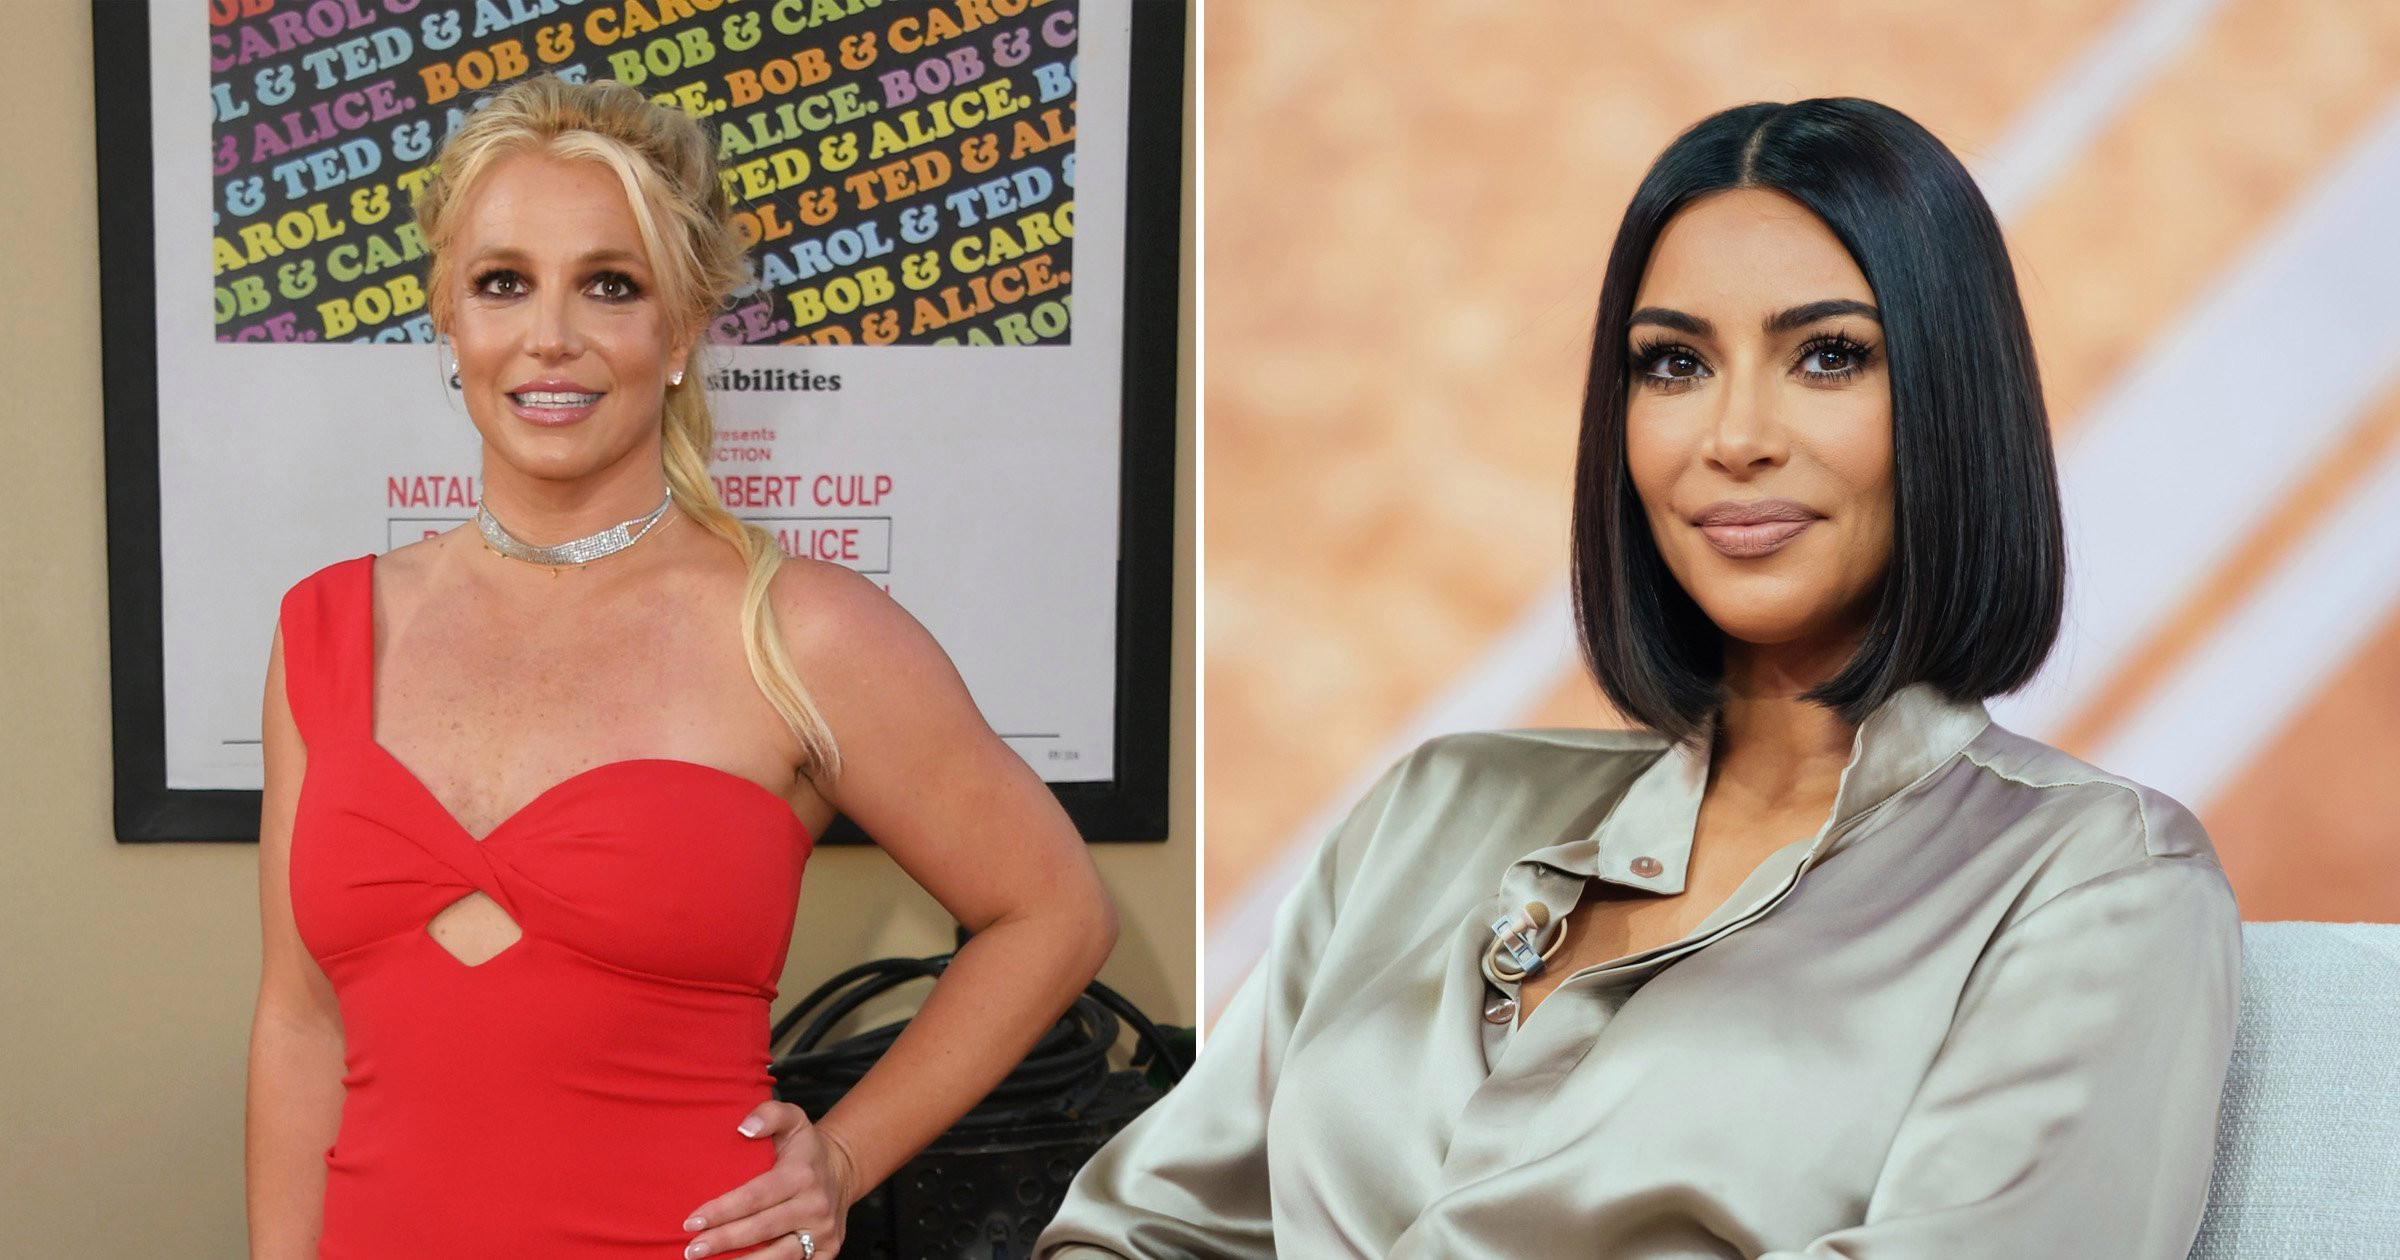 Kim Kardashian feels ‘a lot of empathy’ for Britney Spears after watching documentary as she recalls her own struggles